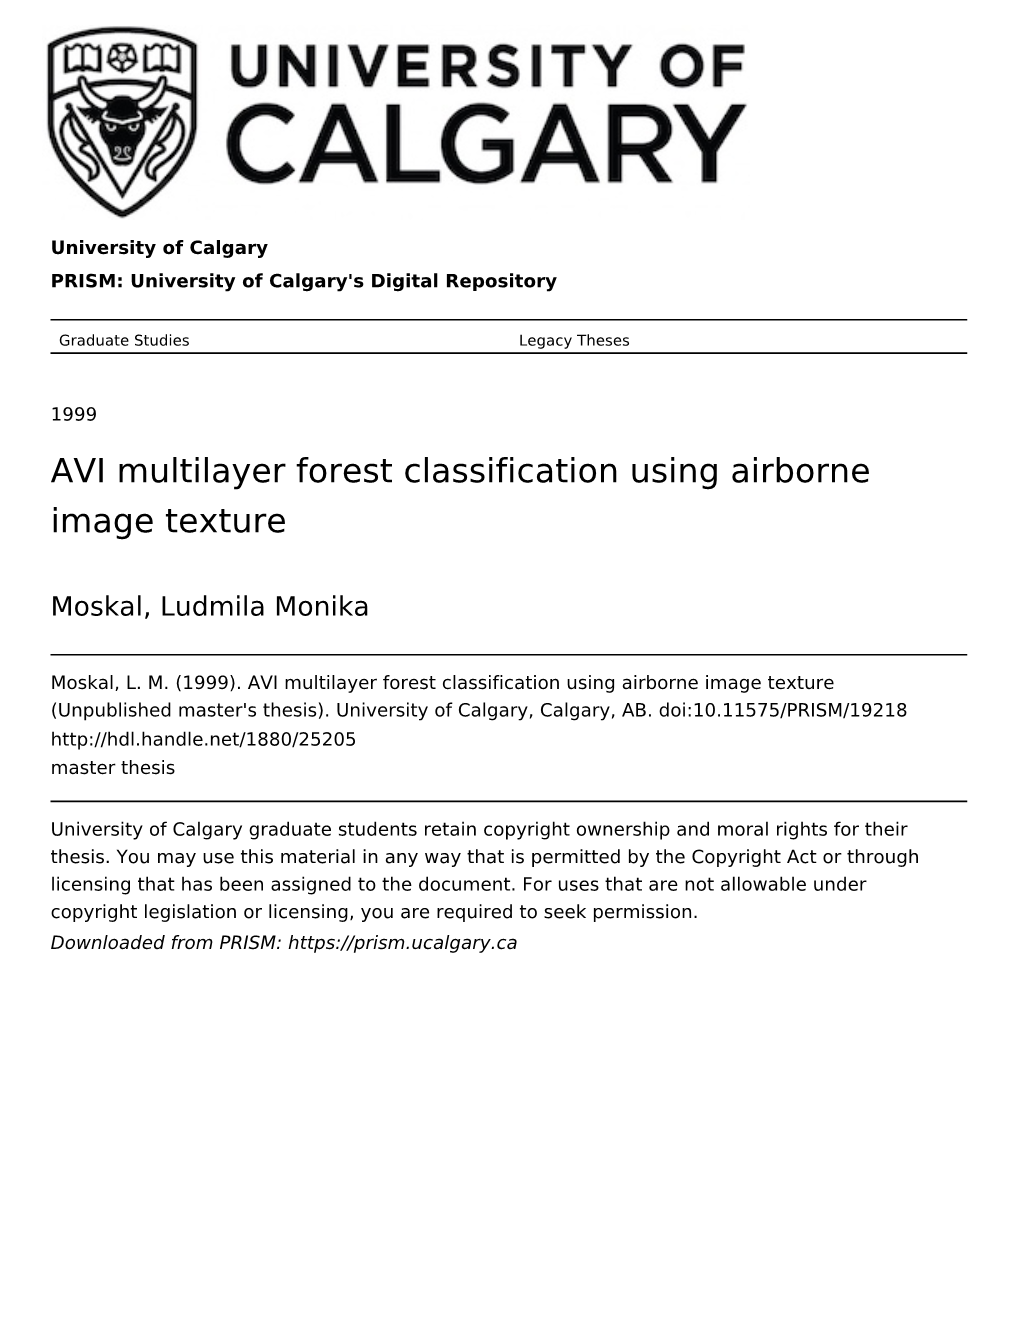 AVI Multilayer Forest Classification Using Airborne Image Texture